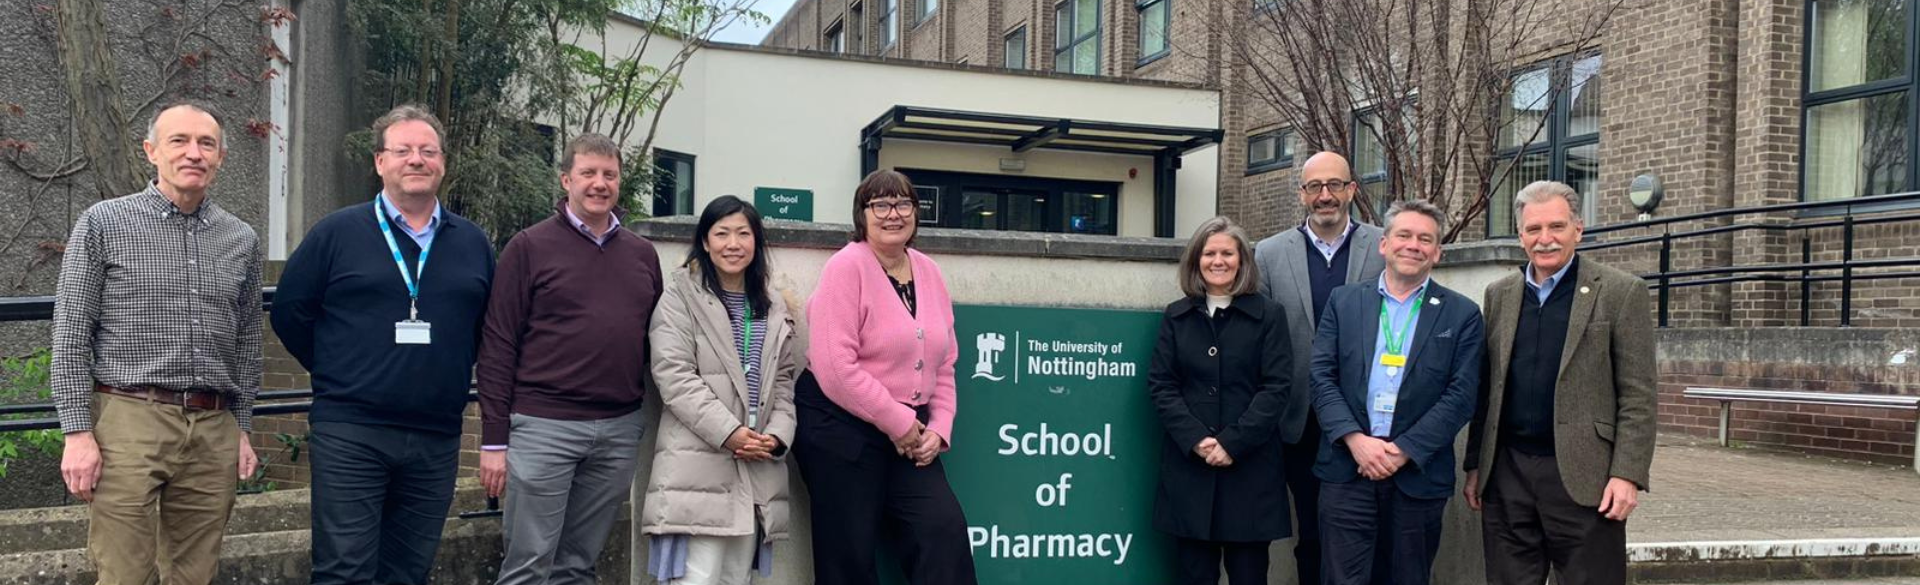 A team of pharmacists and researchers post in front of a sign saying University of Nottingham School of Pharmacy